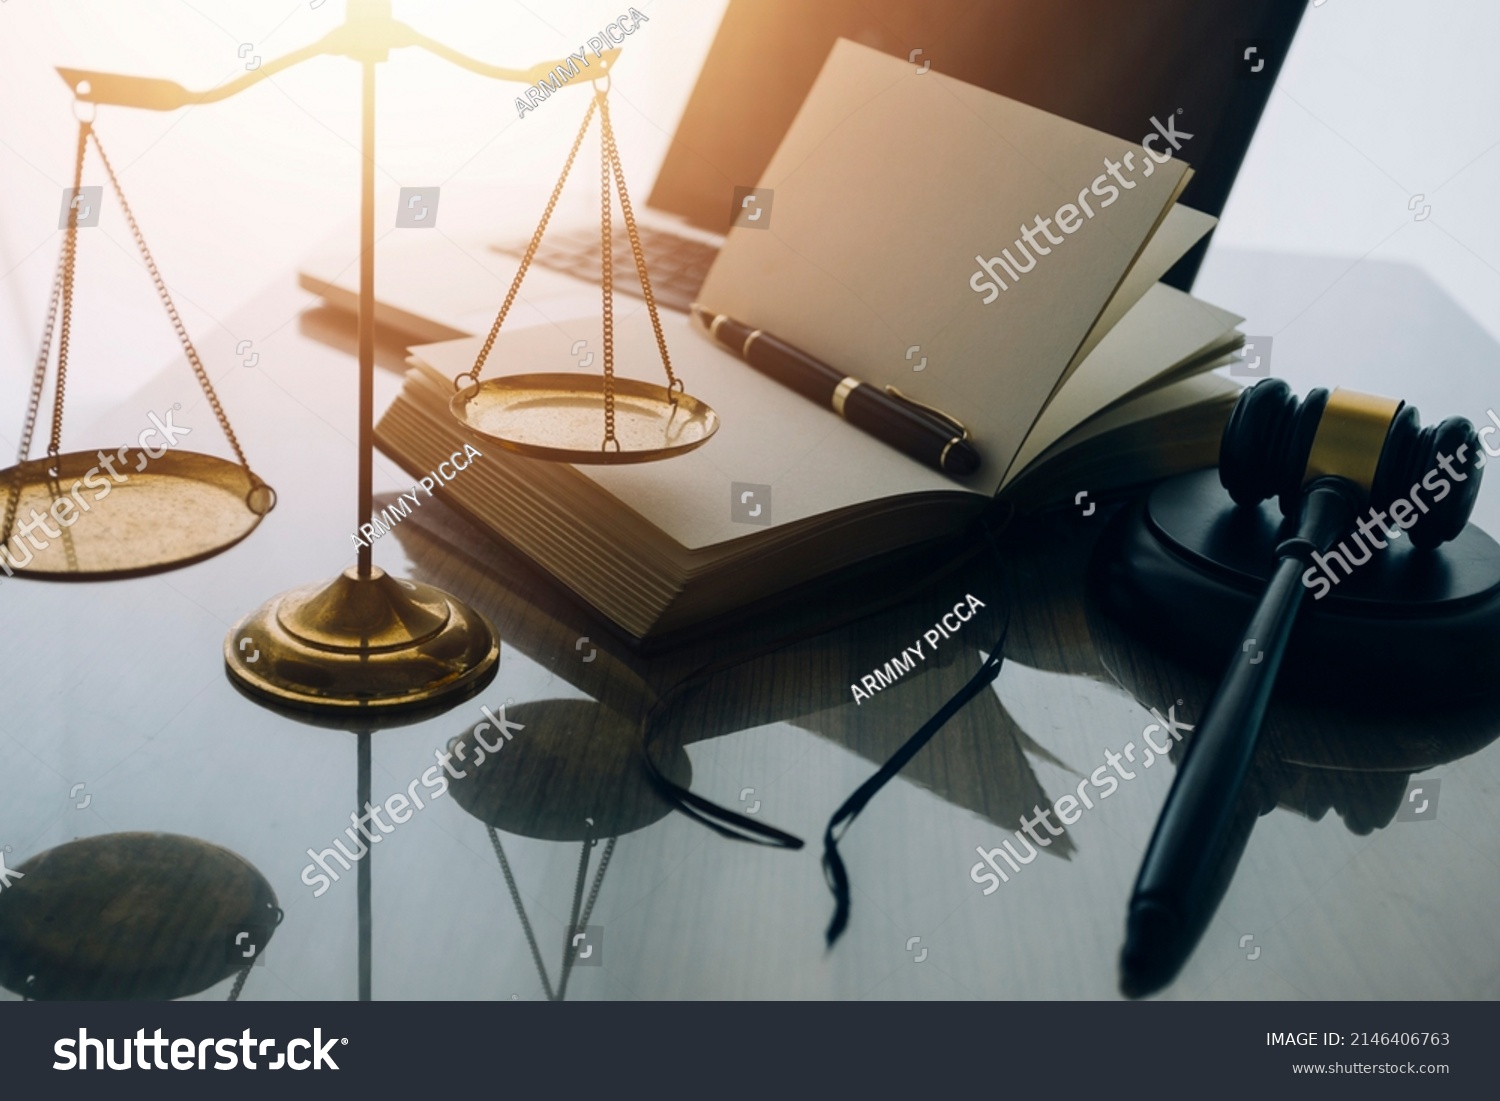 law books and scales of justice on desk in library of law firm. jurisprudence legal education concept. #2146406763